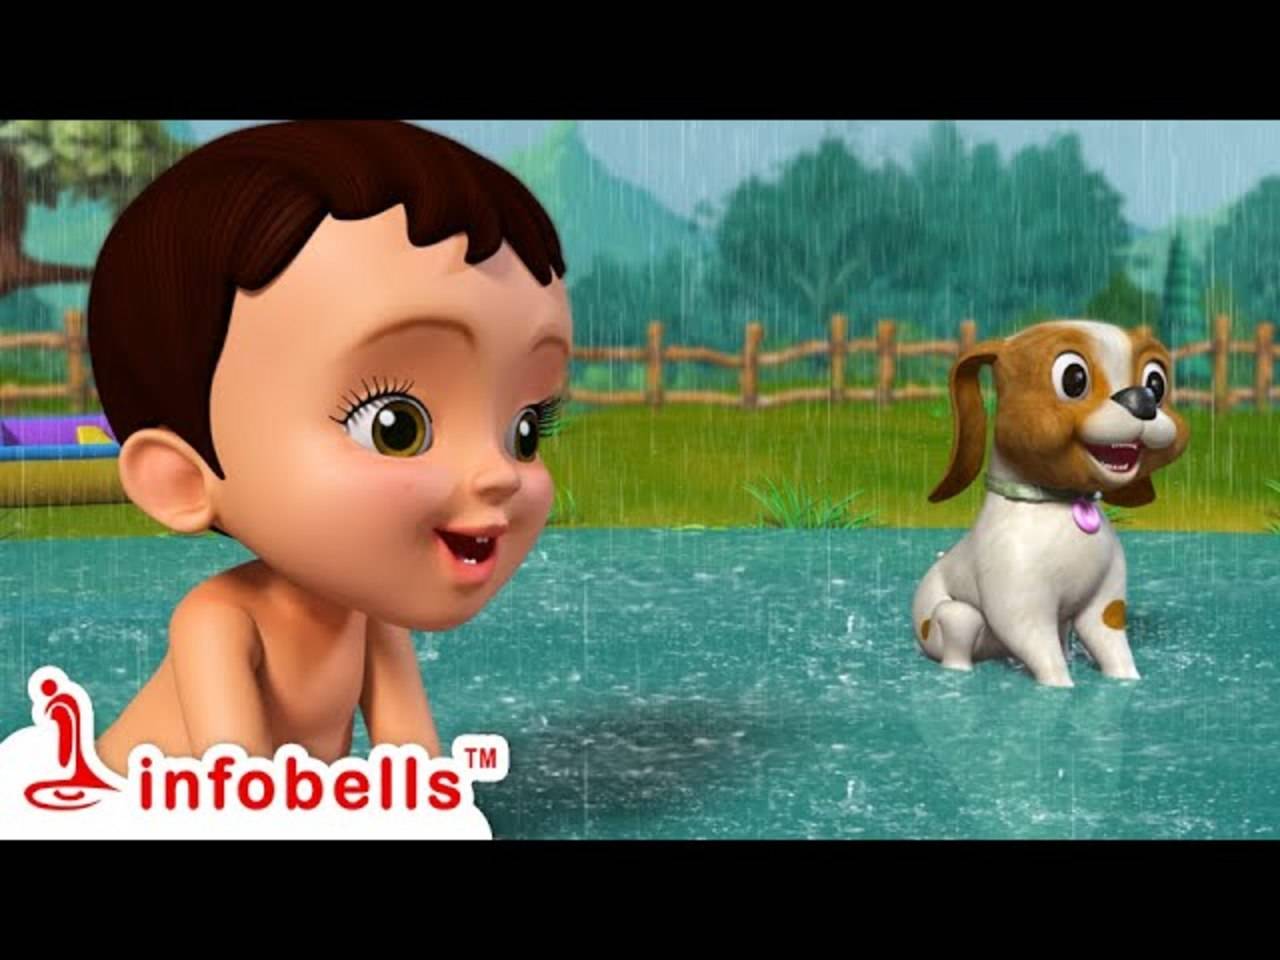 Listen To The Popular Children Bengali Nursery Rhyme 'Rain Song' For Kids -  Check Out Fun Kids Nursery Rhymes And Rain Song In Bengali | Entertainment  - Times of India Videos